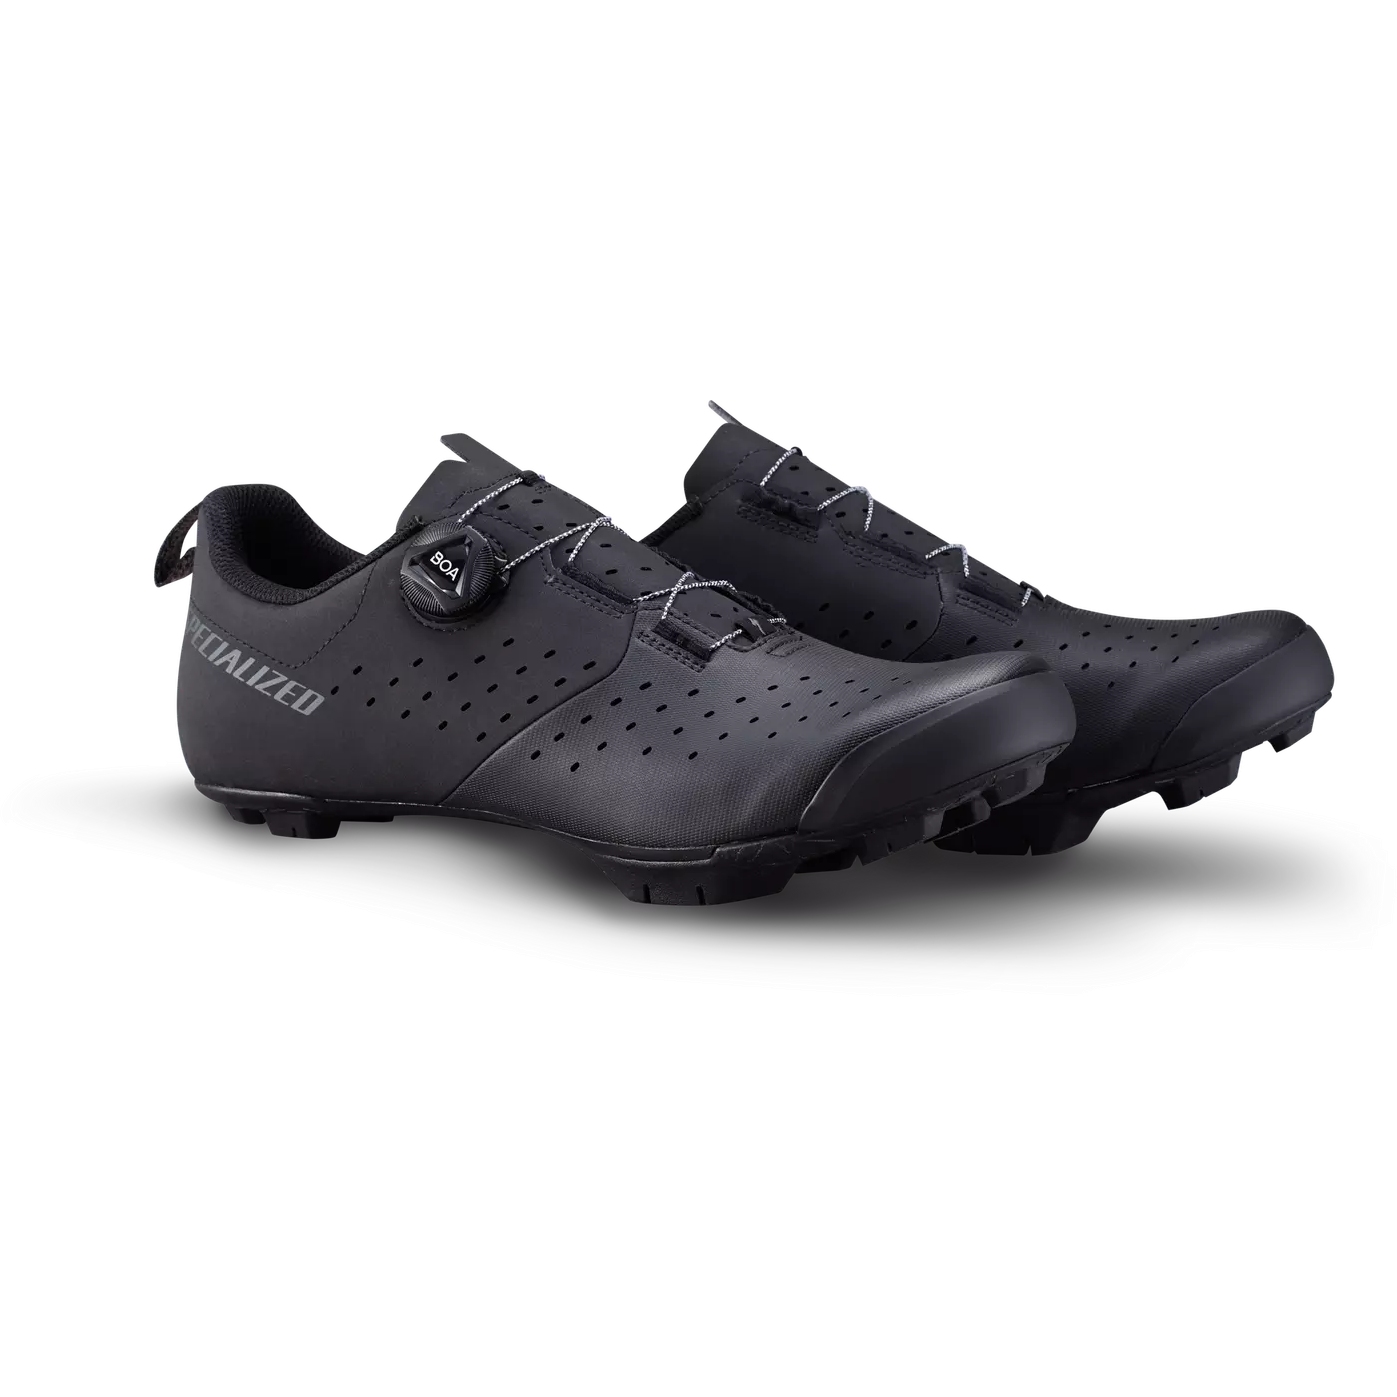 Image of Specialized Recon 1.0 Gravel Shoes - Black